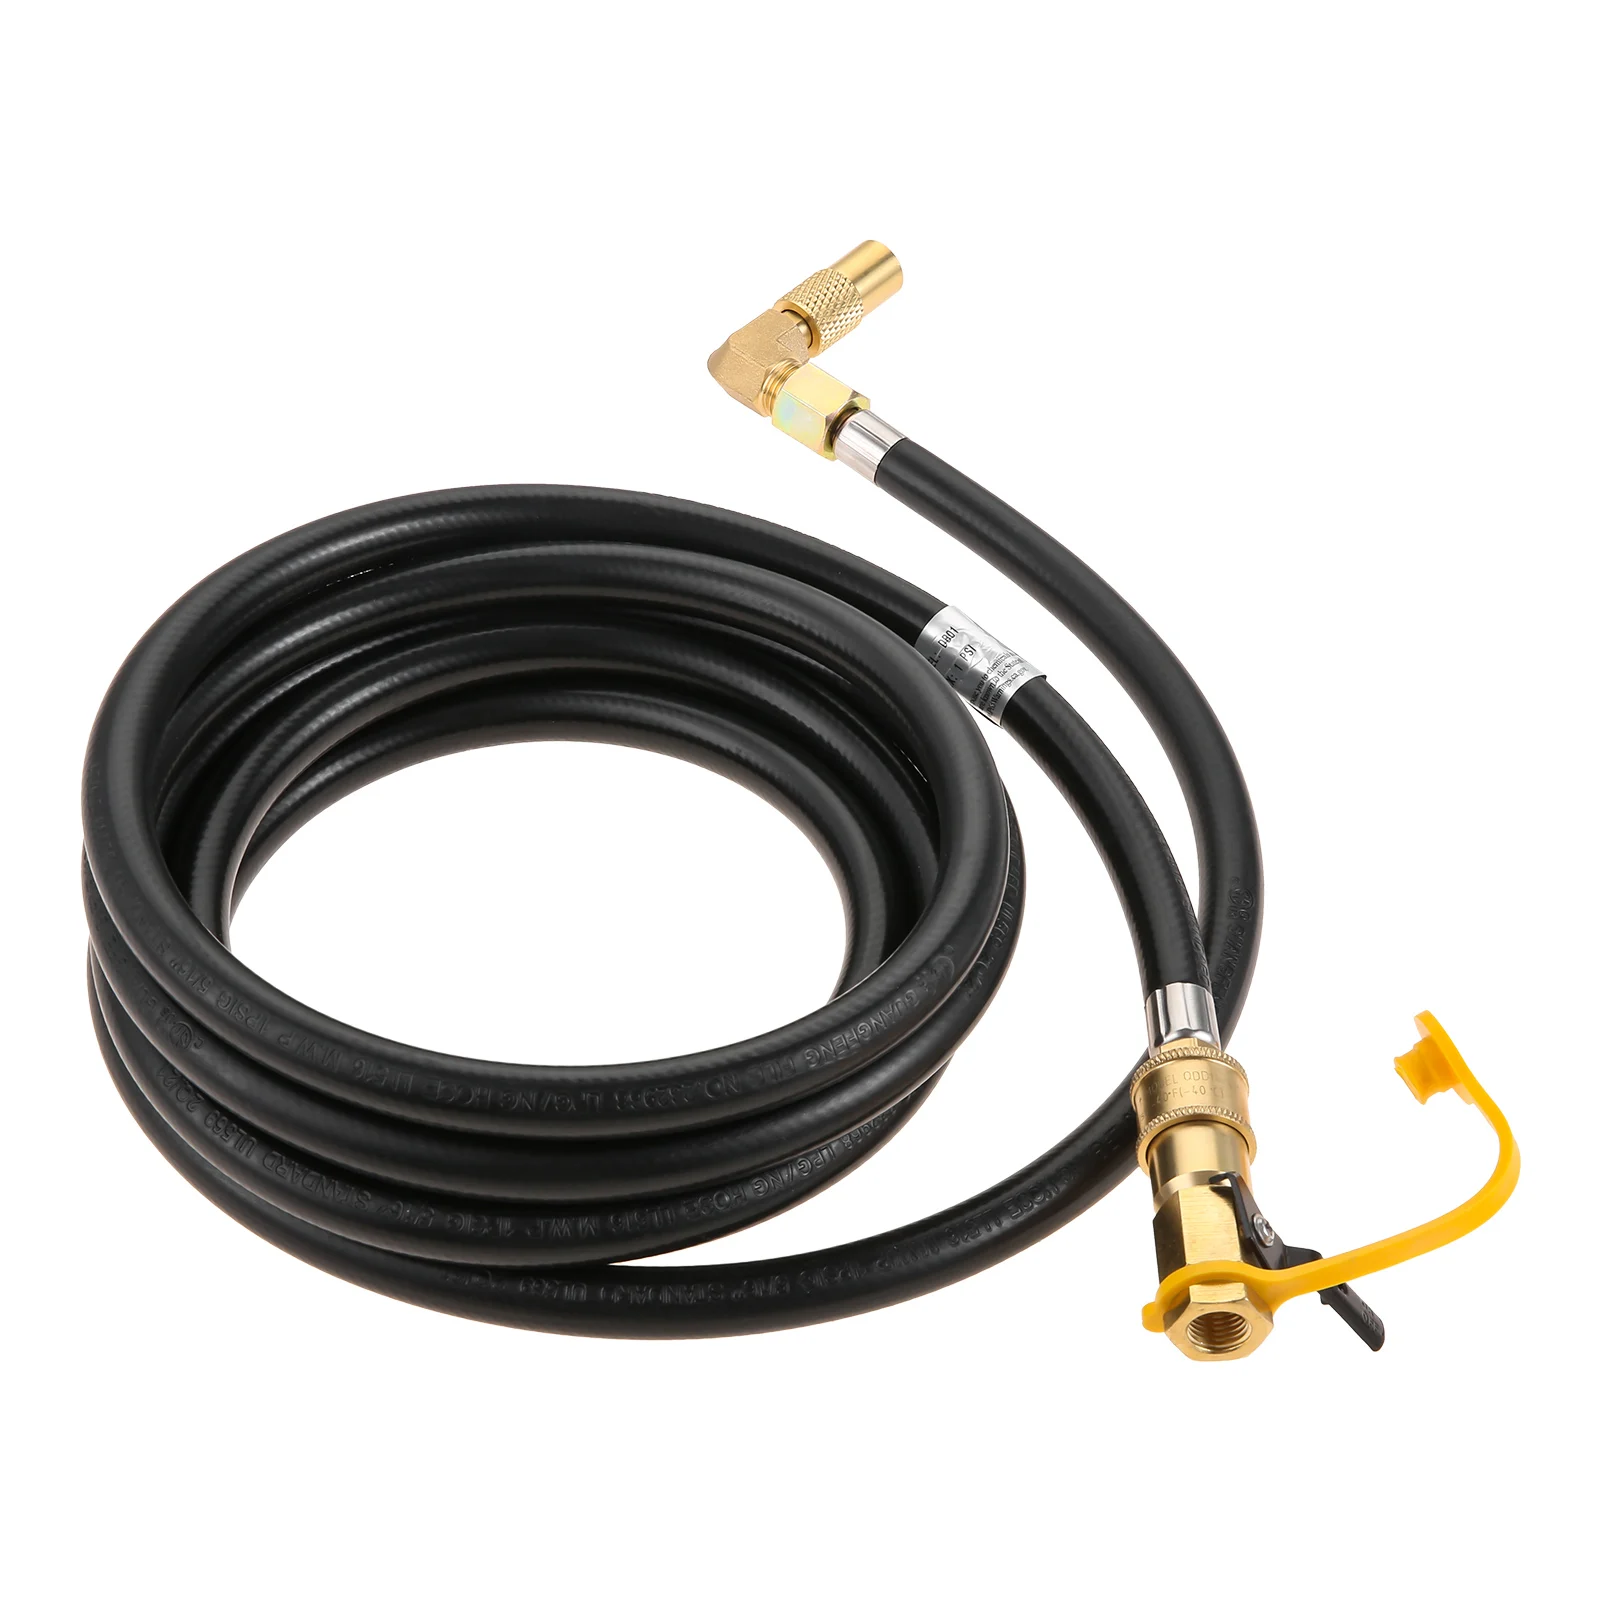 

12 Feet Quick Connect RV Propane Hose Extension Line with 1/4" Shut Off Valve Connector Kit for Portable BBQ Grill RV Trailer